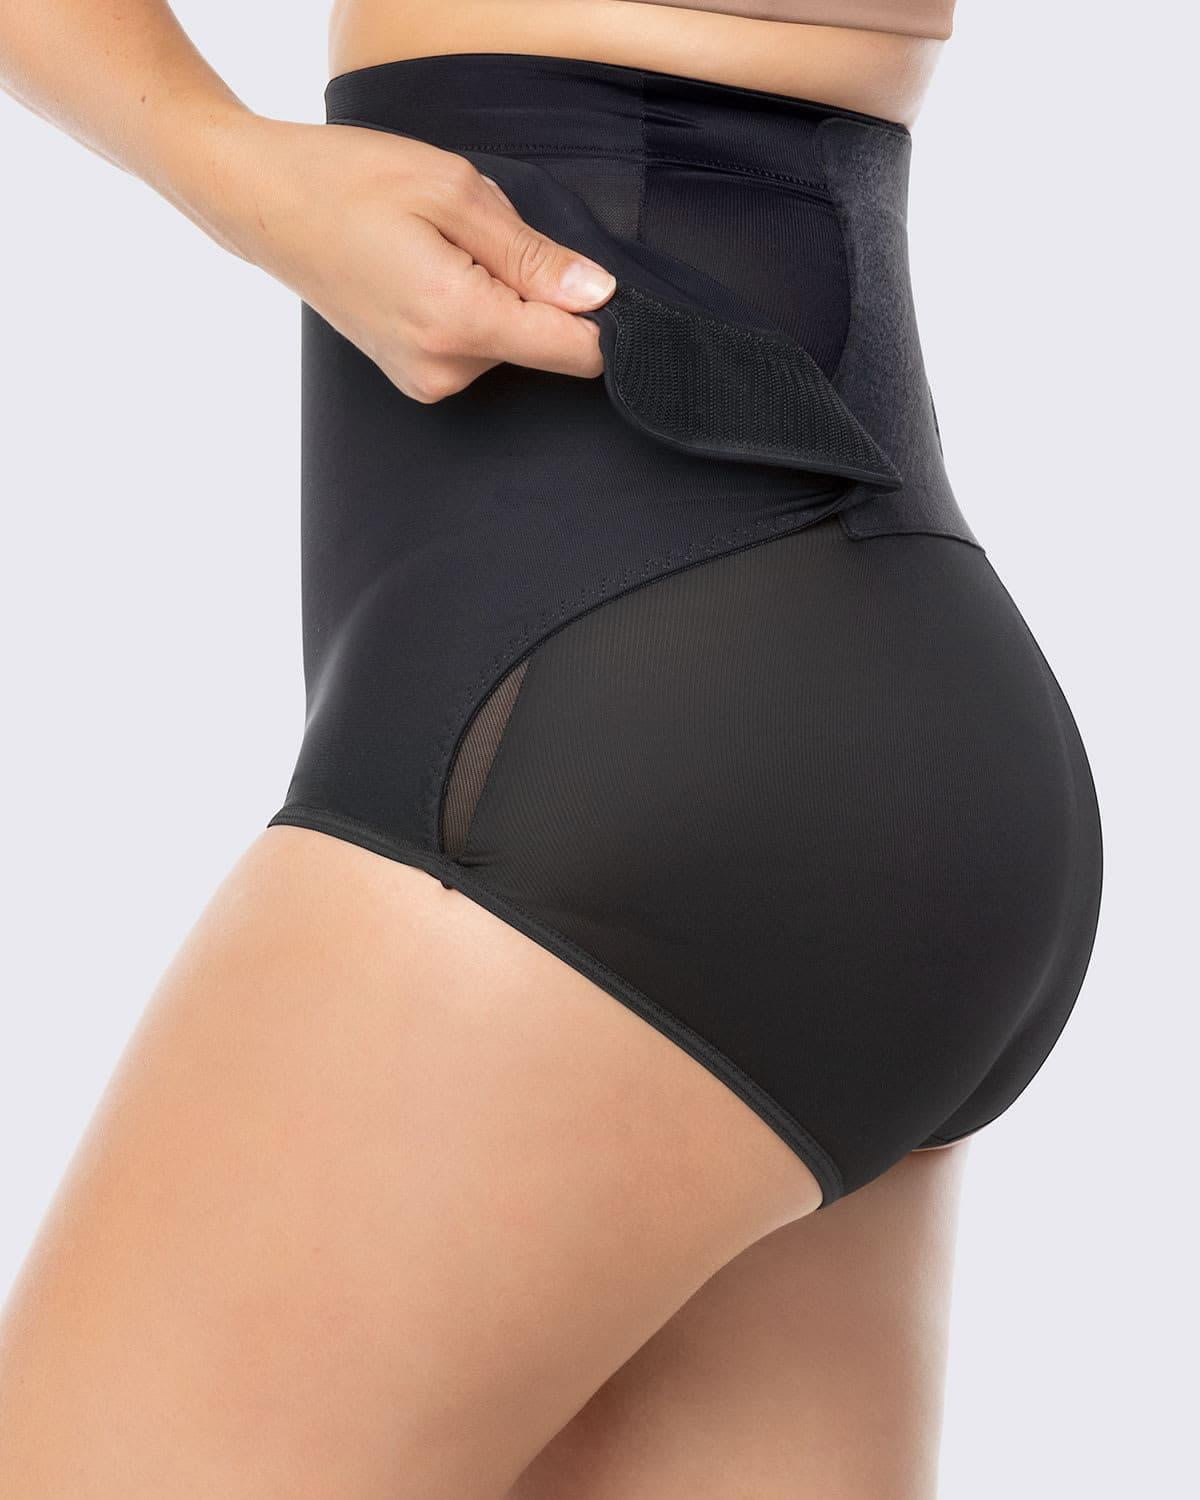 Shop Fupa Slimming Panties with great discounts and prices online